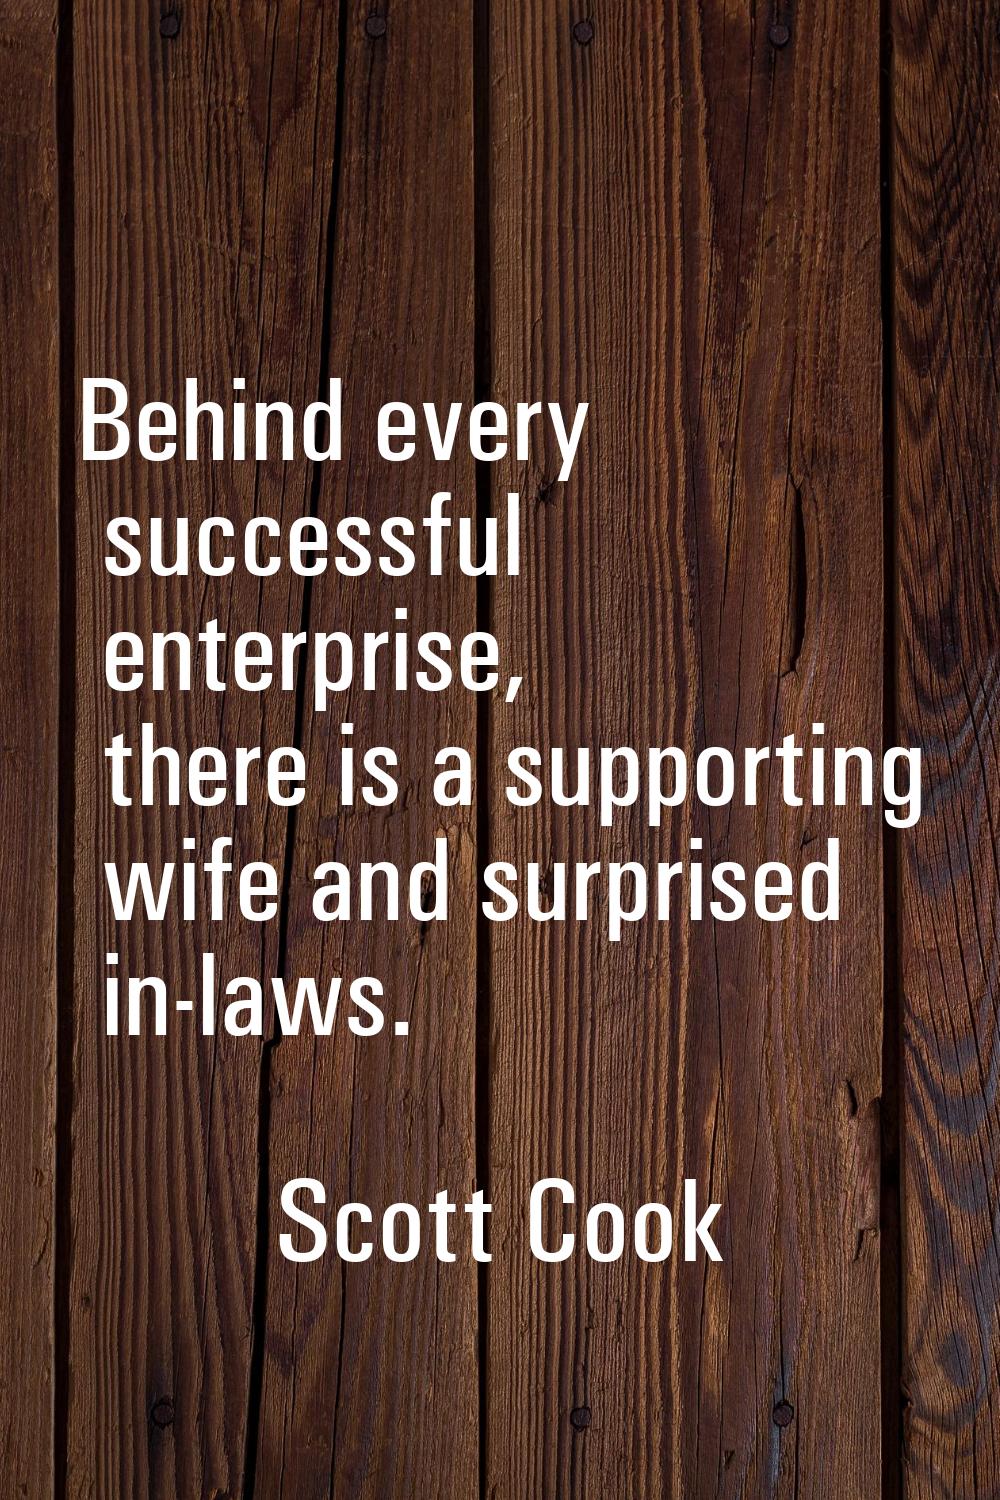 Behind every successful enterprise, there is a supporting wife and surprised in-laws.